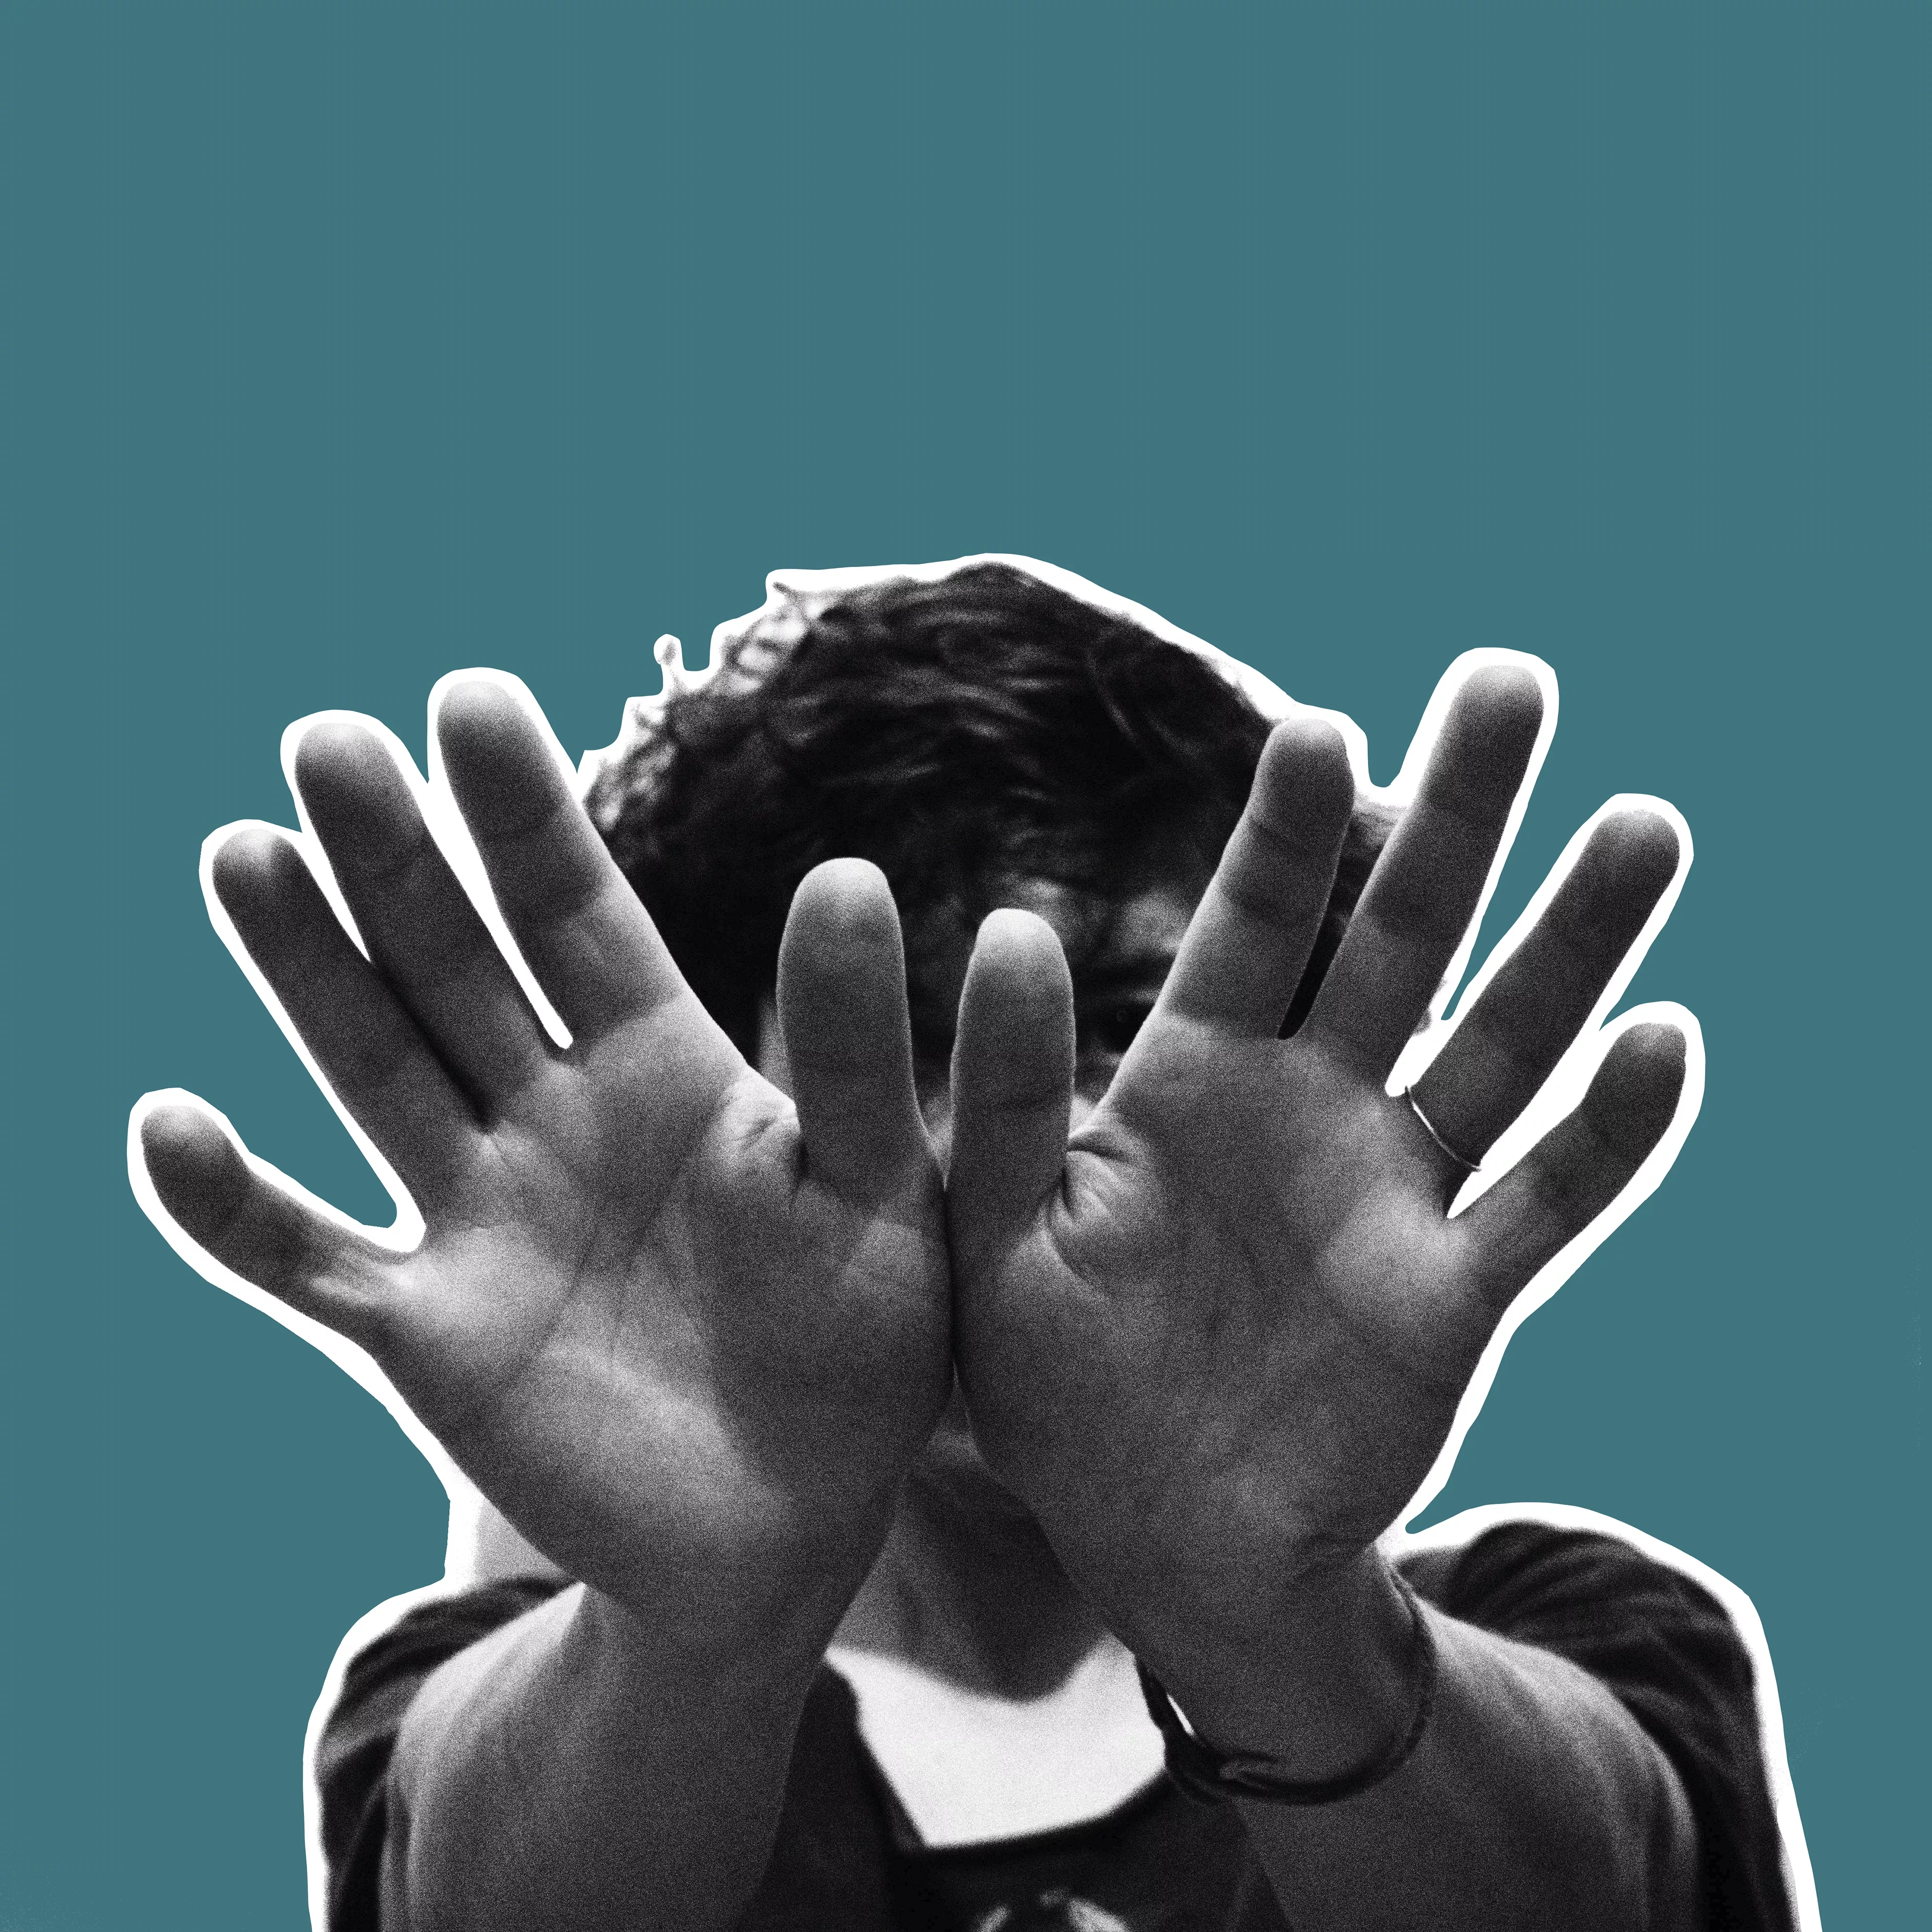 I can feel you creep into my private life - Tune-Yards